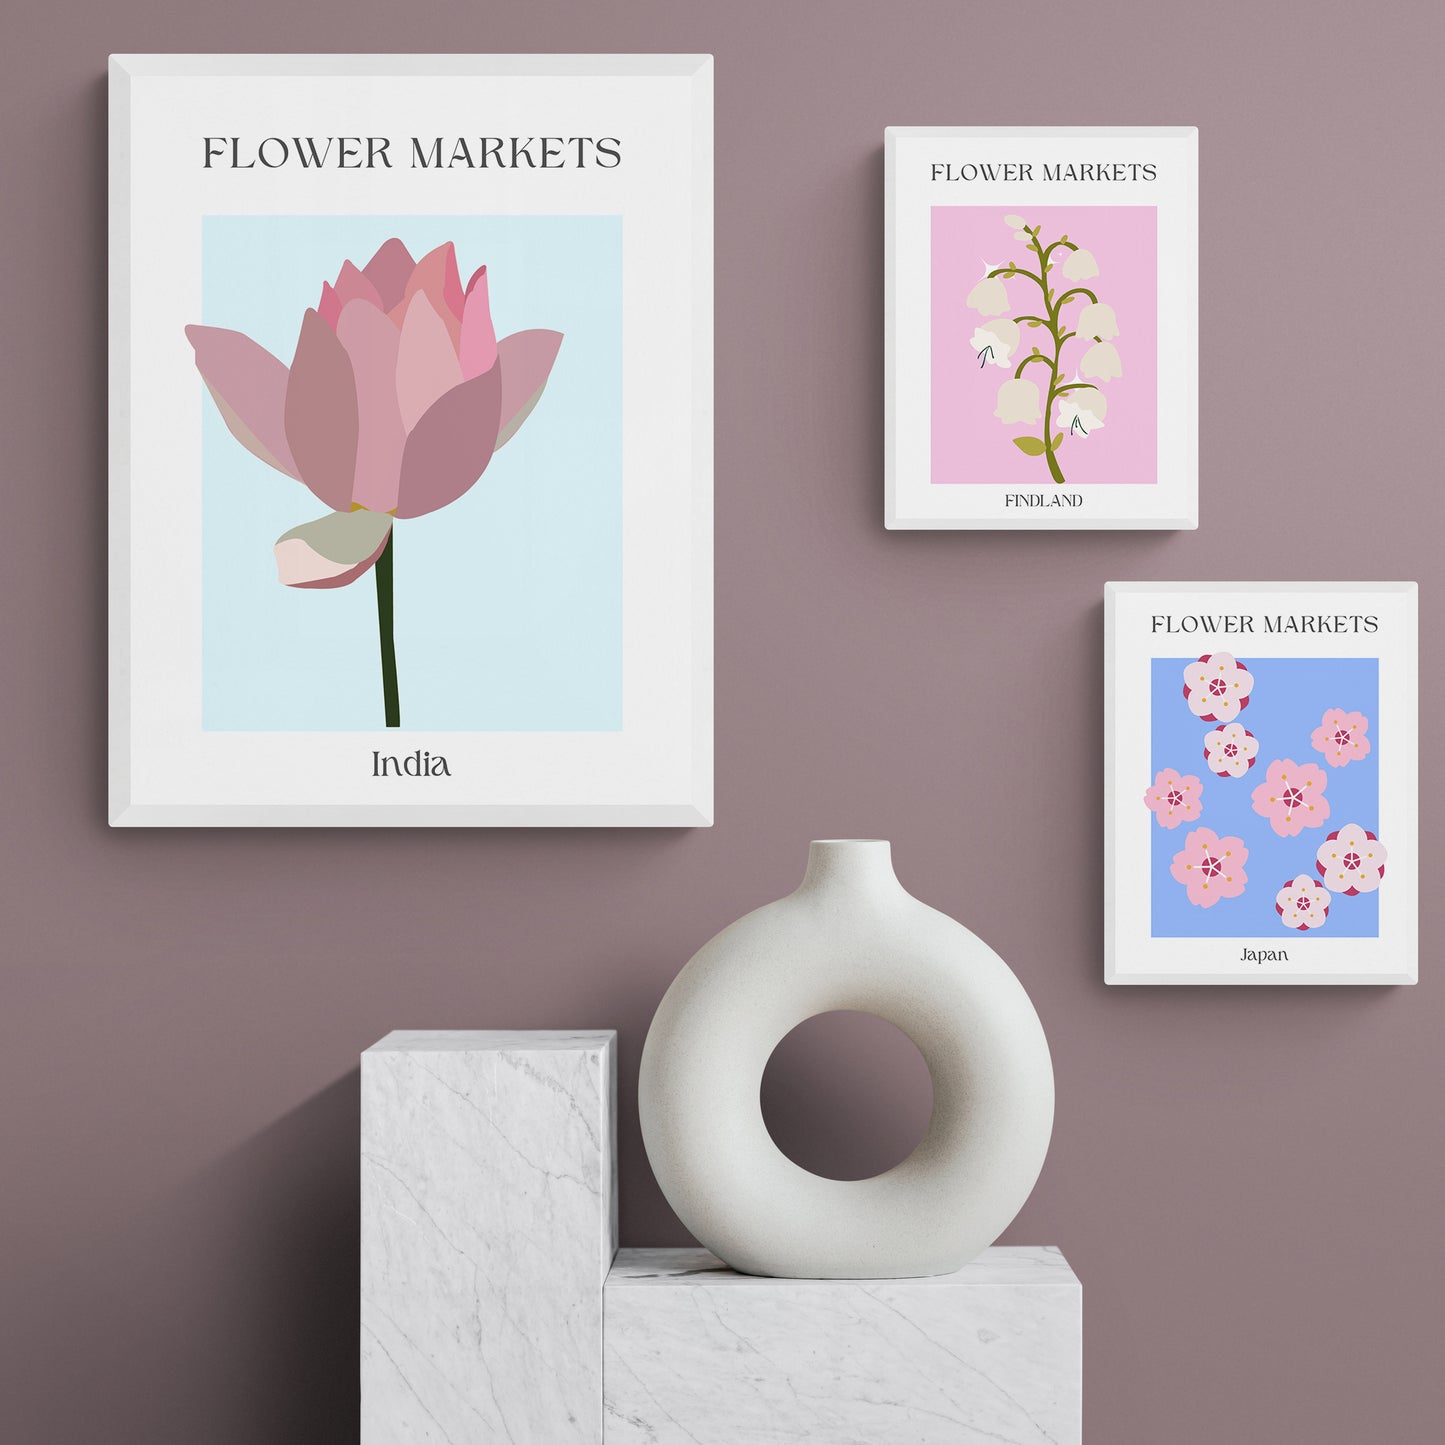 Introducing the Austria Flowers Market Print: experience the beauty of floral shapes with this limited edition poster. Featuring a poster from shapes, formes, art des formes courbes, colorful drawing posters, and wall art prints inspired by Matisse's art, this poster is perfect for adding a touch of pastel room décor to your gallery wall. Experience the beauty of Austrian flower markets with this special poster.